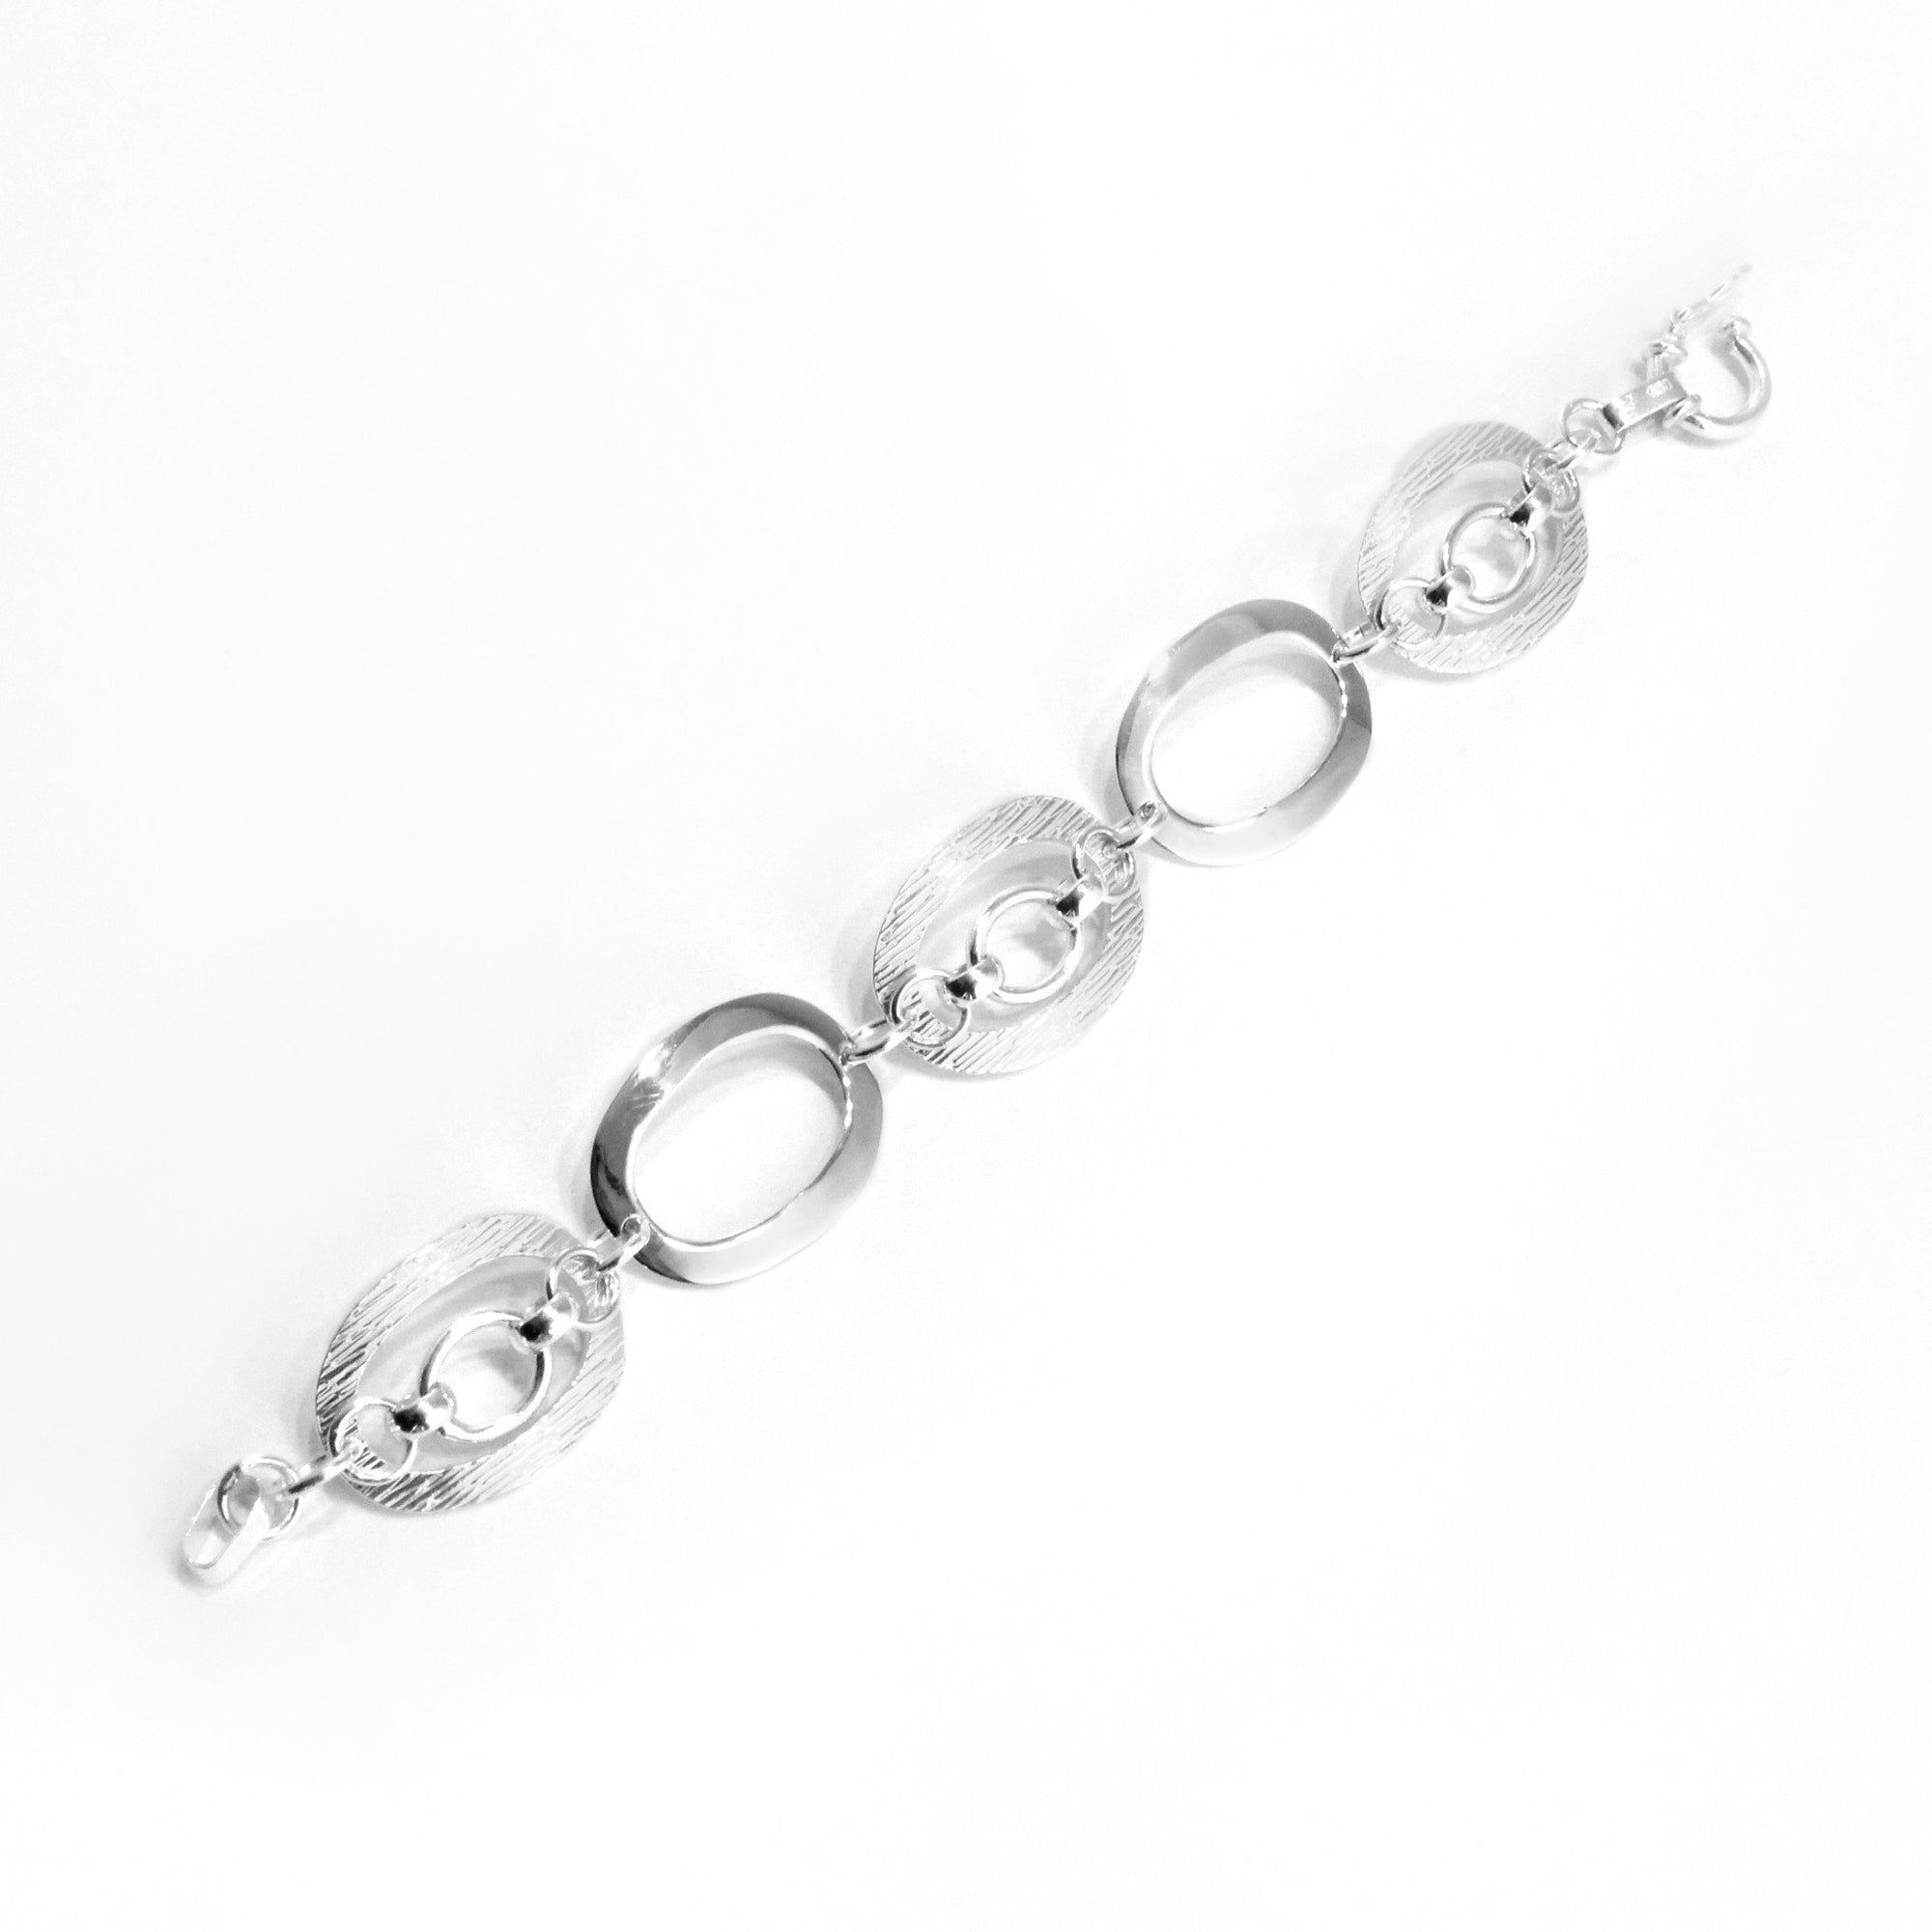 Textured Oval  Sterling Silver Bracelet - Qinti - The Peruvian Shop